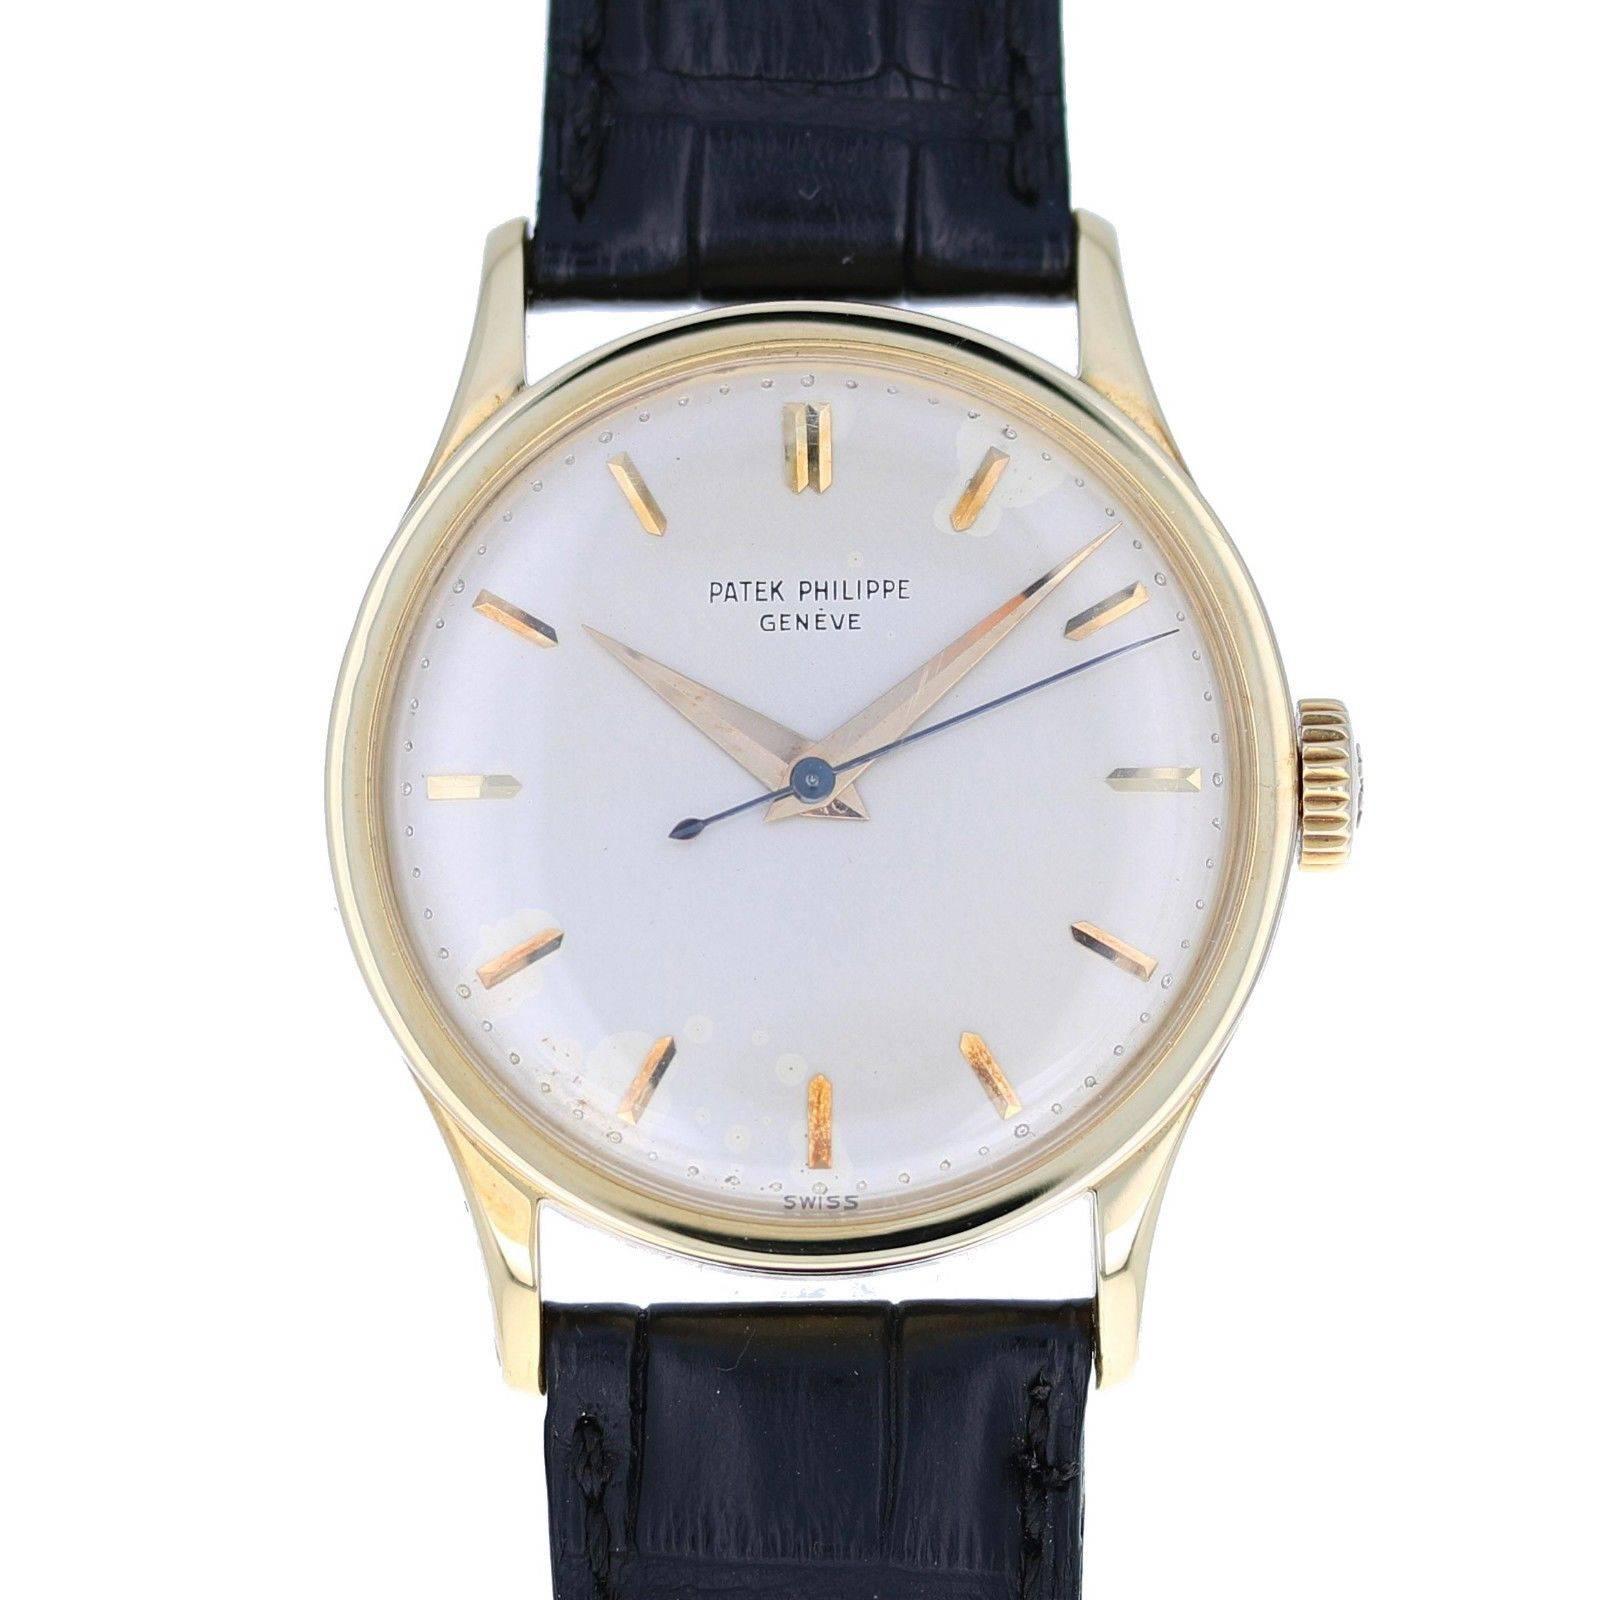 Brand Name	Patek Philippe
Style Number	570J 
Also Called	570
Series	Calatrava
Gender	Men's
Case Material	18k Yellow Gold
Dial Color	Gilt Sunburst
Movement	Mechanical Wind
Engine	Cal. 27 SC - 18 Jewels
Functions	Hours, Minutes, Seconds
Crystal